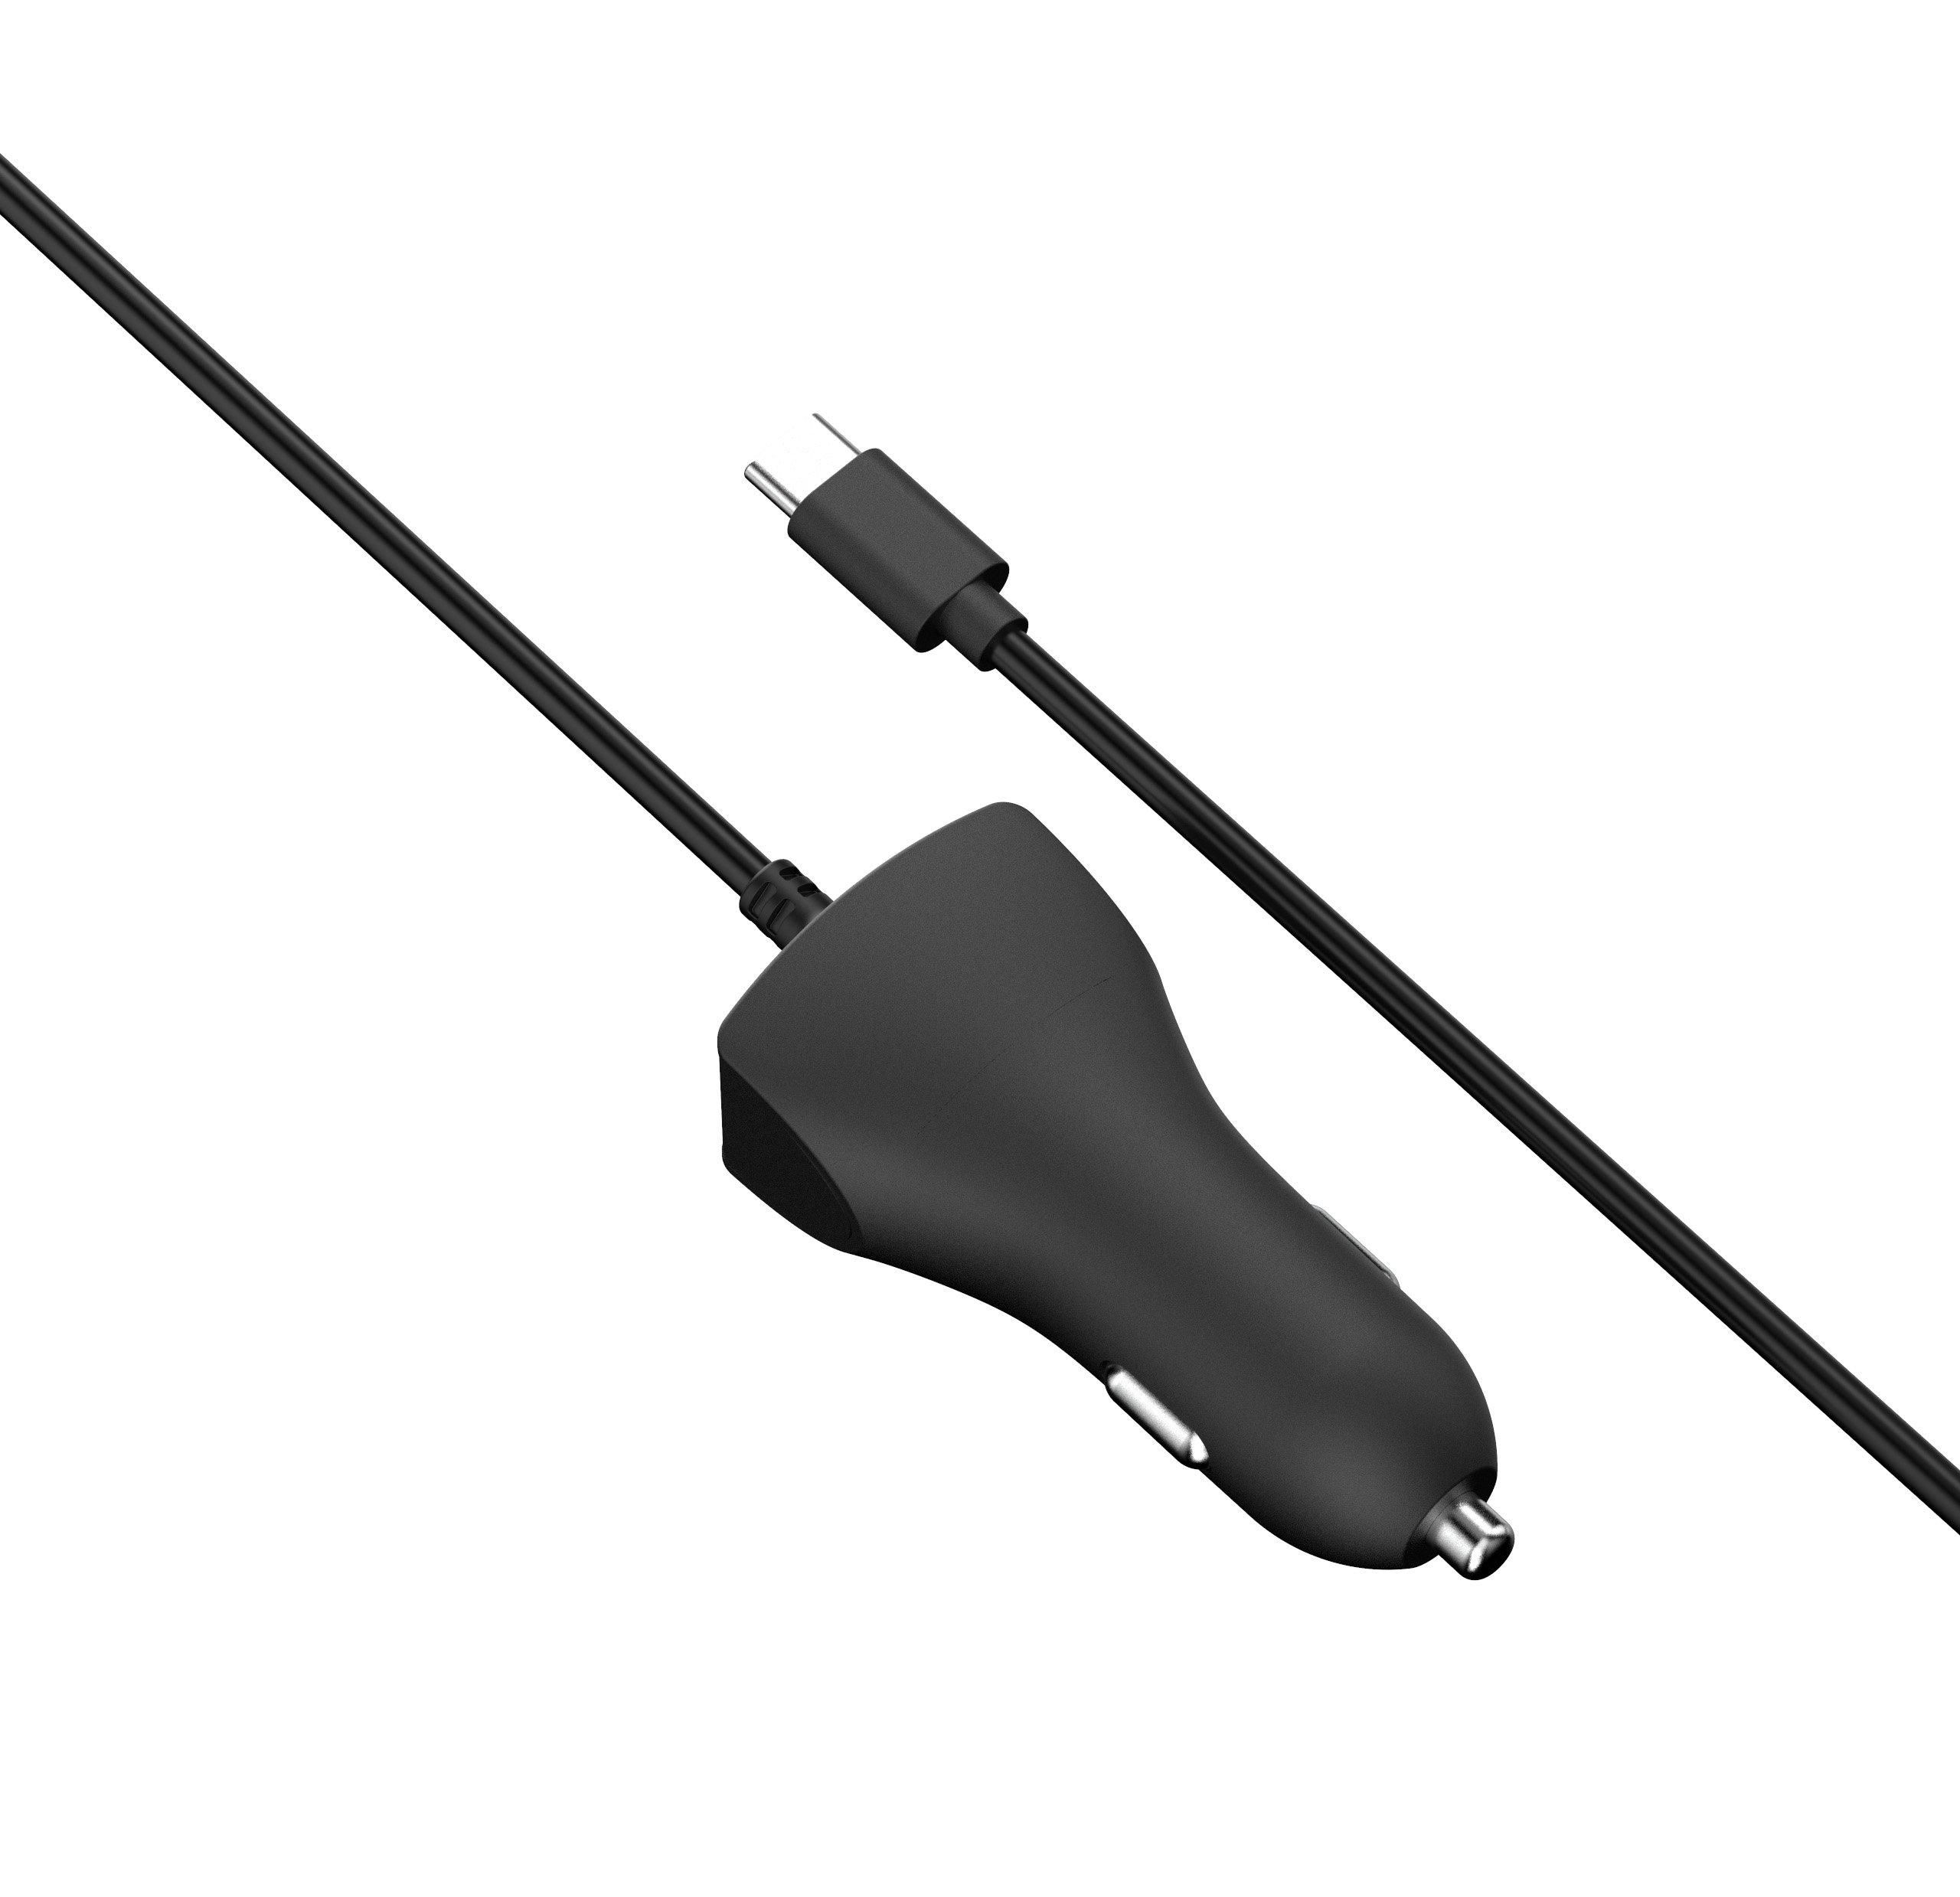 USB Type C Charging Cable for Switch - Hardware - Nintendo - Nintendo  Official Site